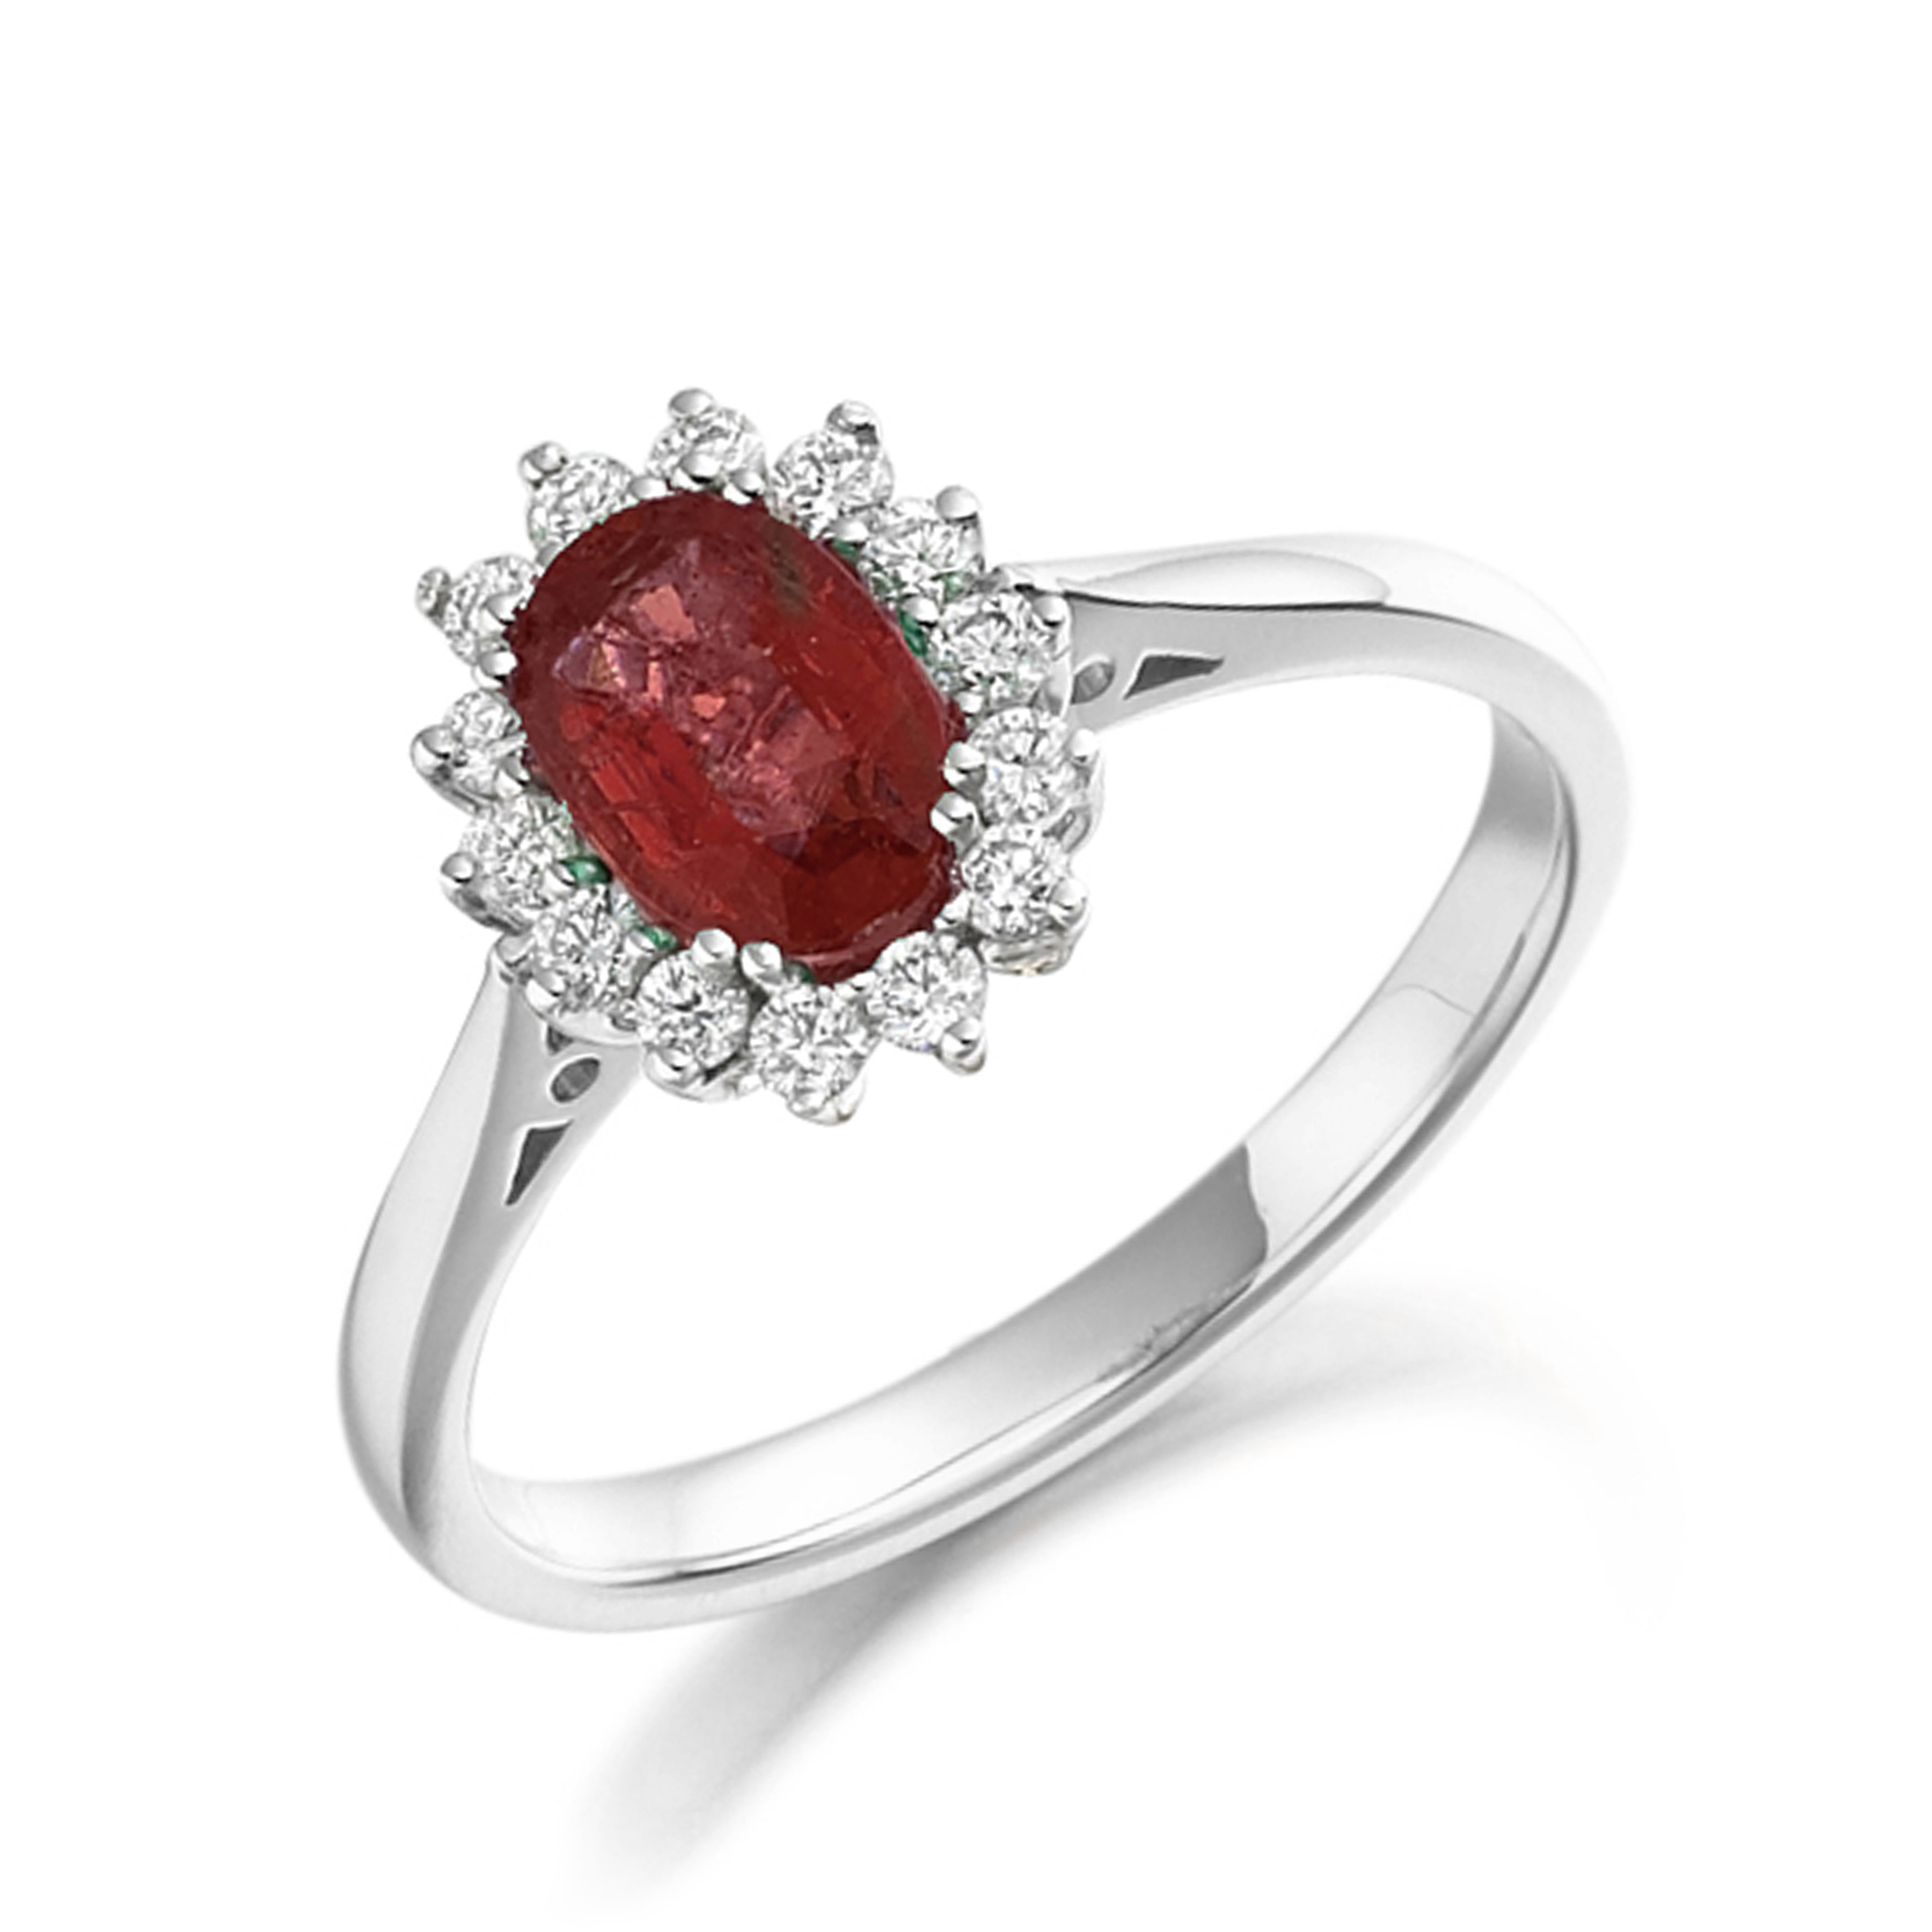 6X4mm Oval Ruby Halo Diamond And Gemstone Engagement Ring